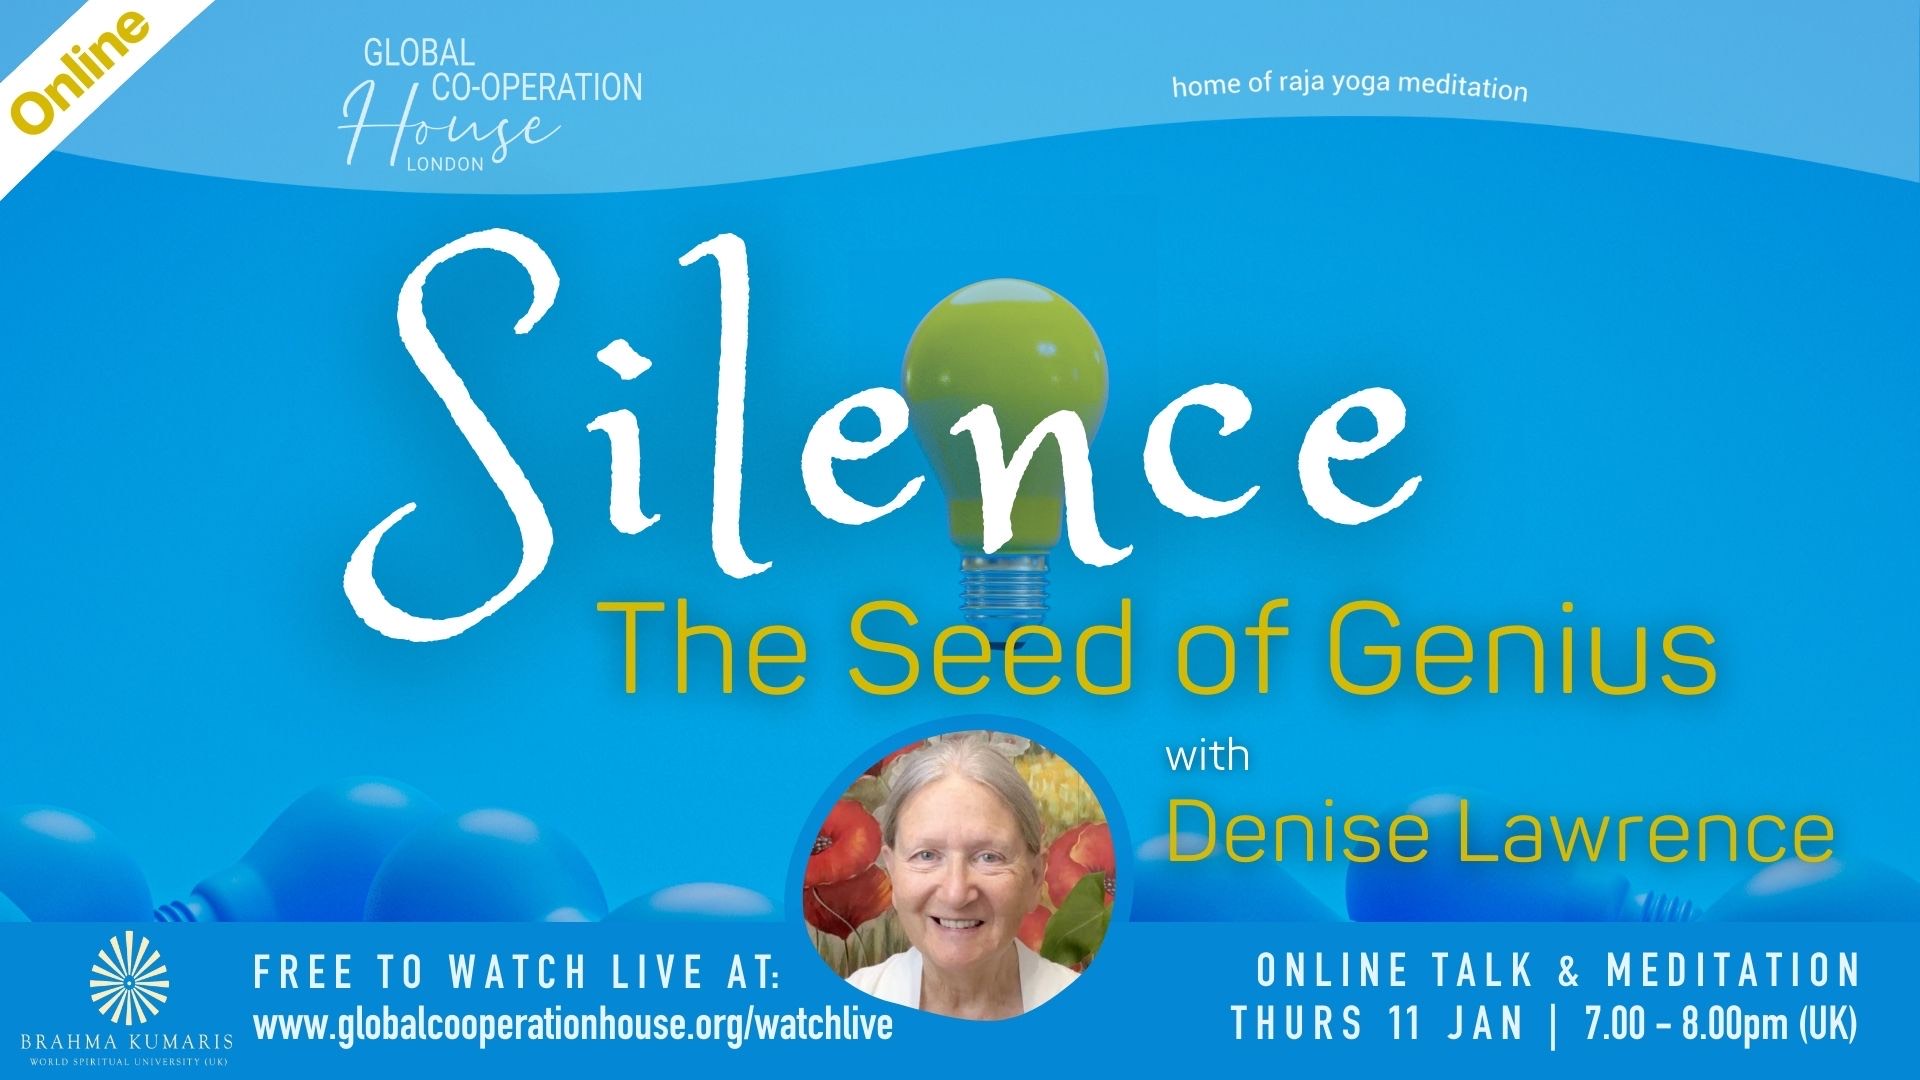 Thursday talk special: Silence - The Seed of Genius